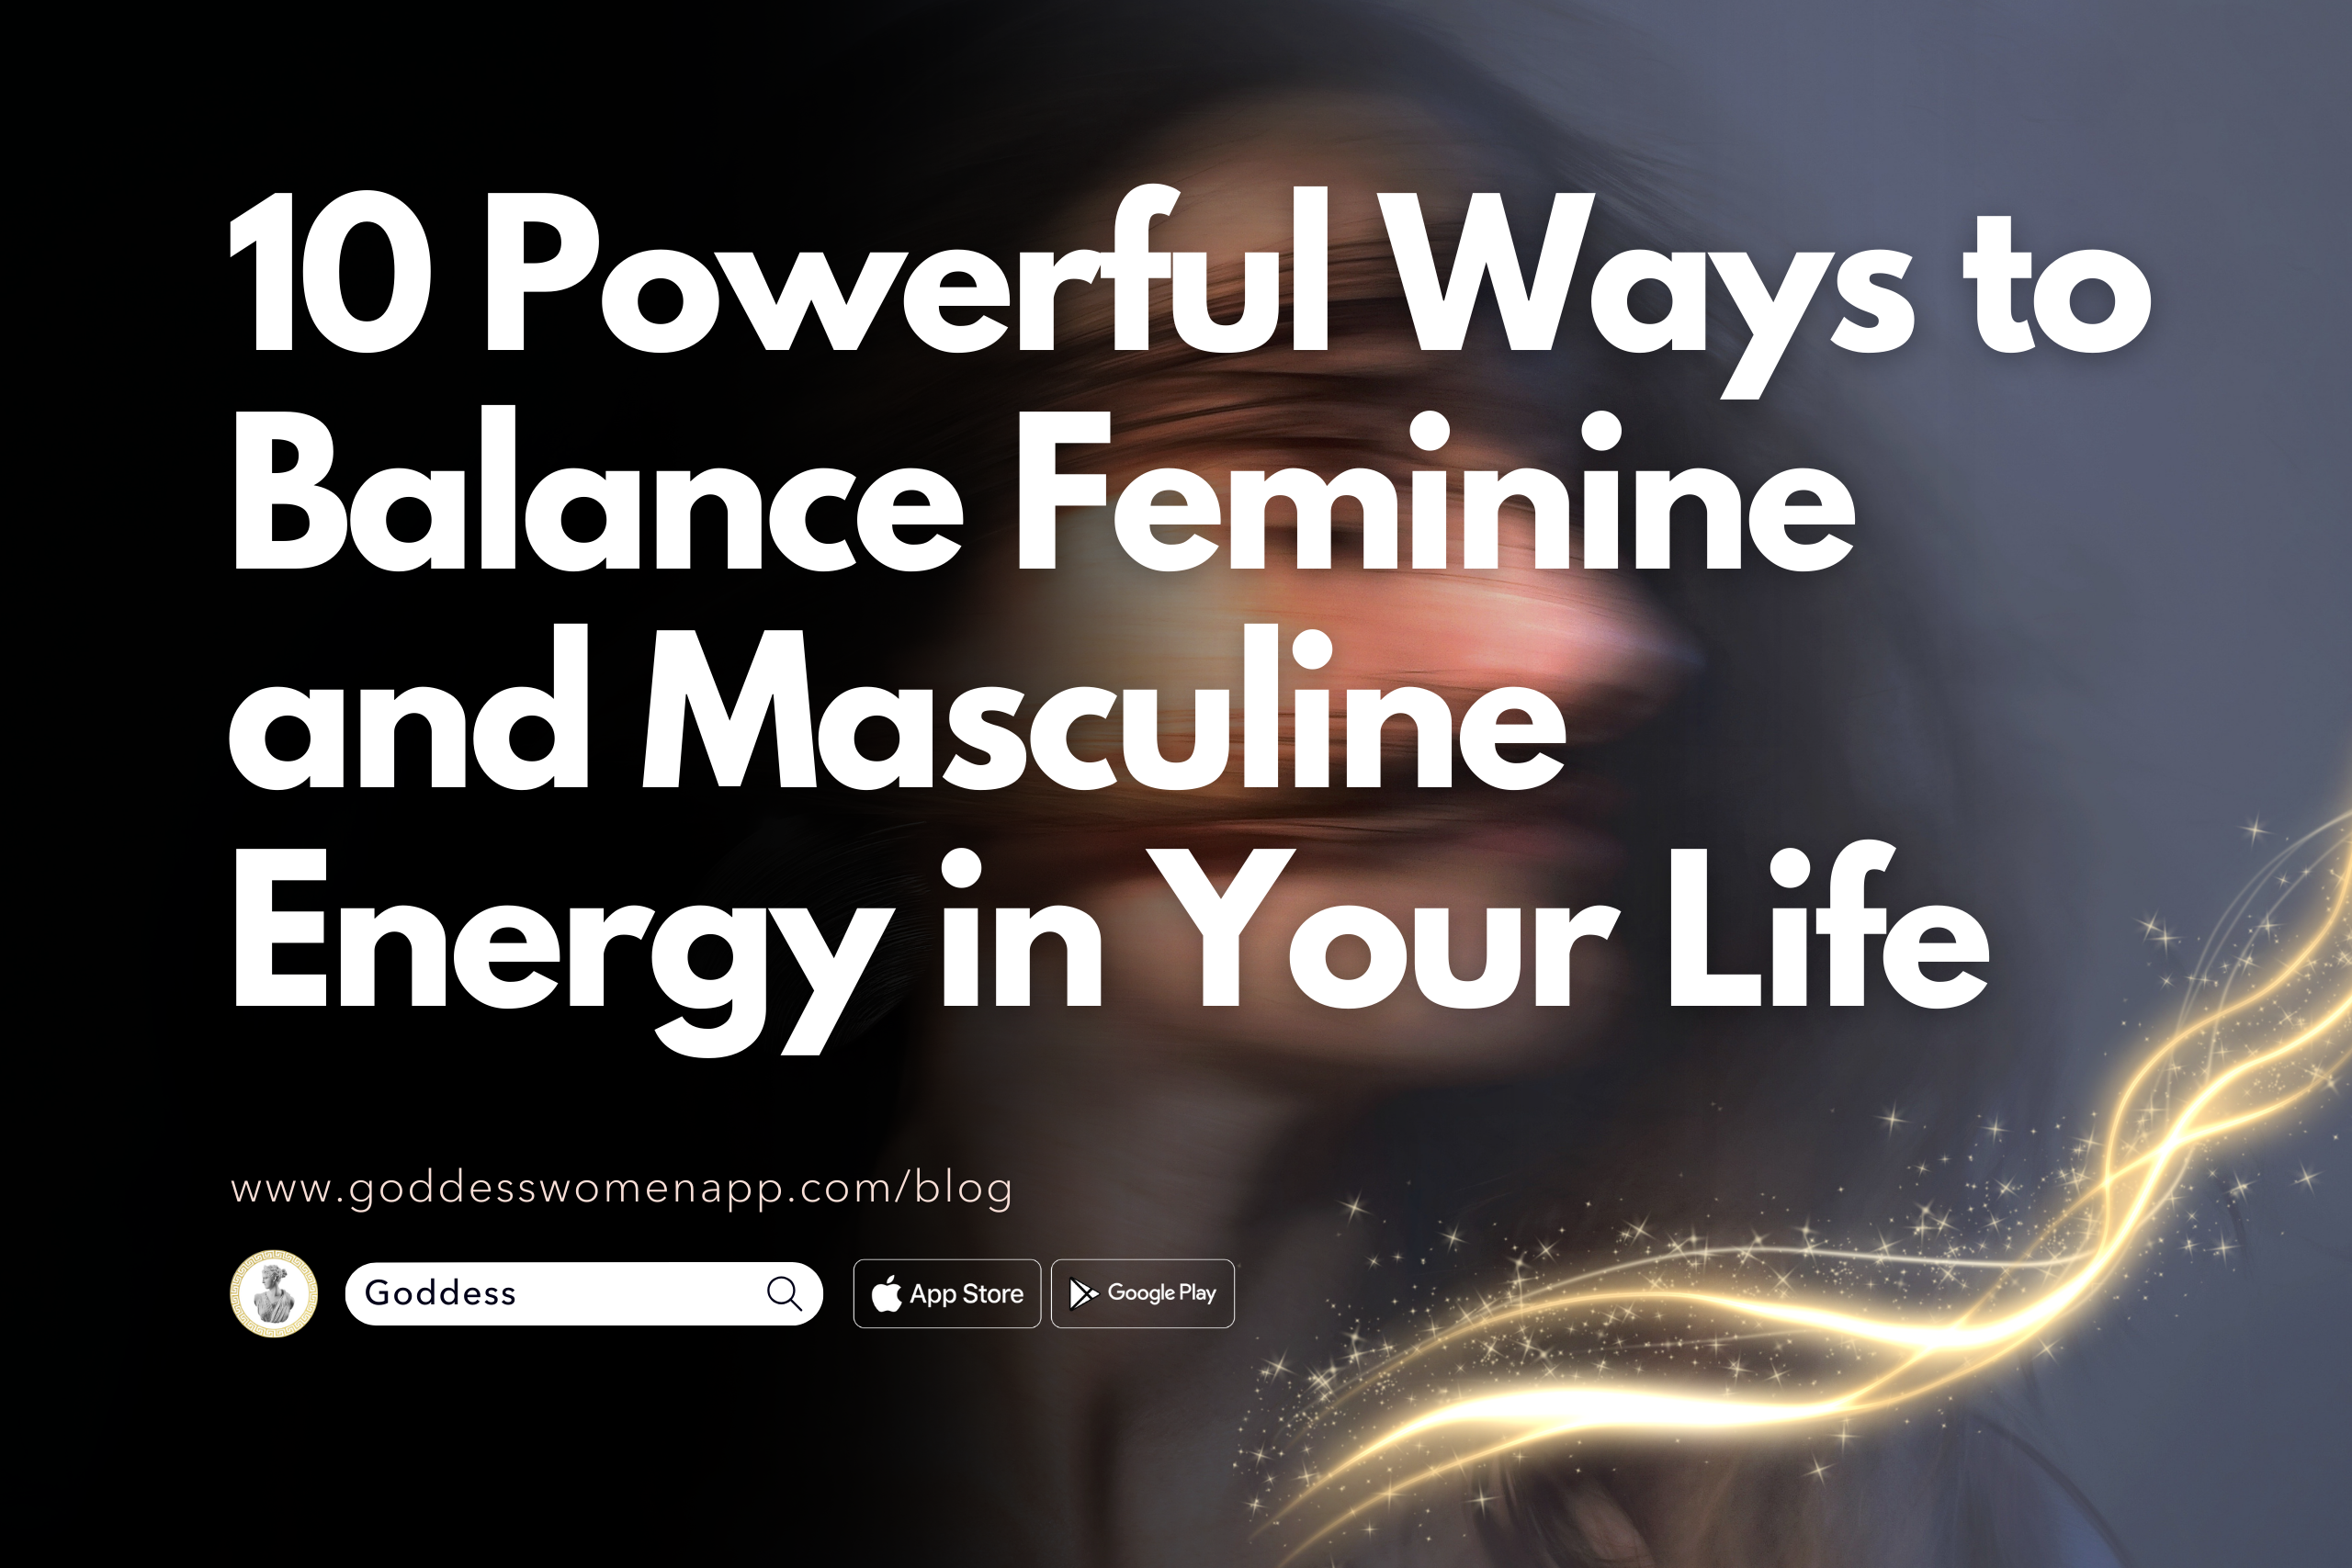 10 Powerful Ways to Balance Feminine and Masculine Energy in Your Life